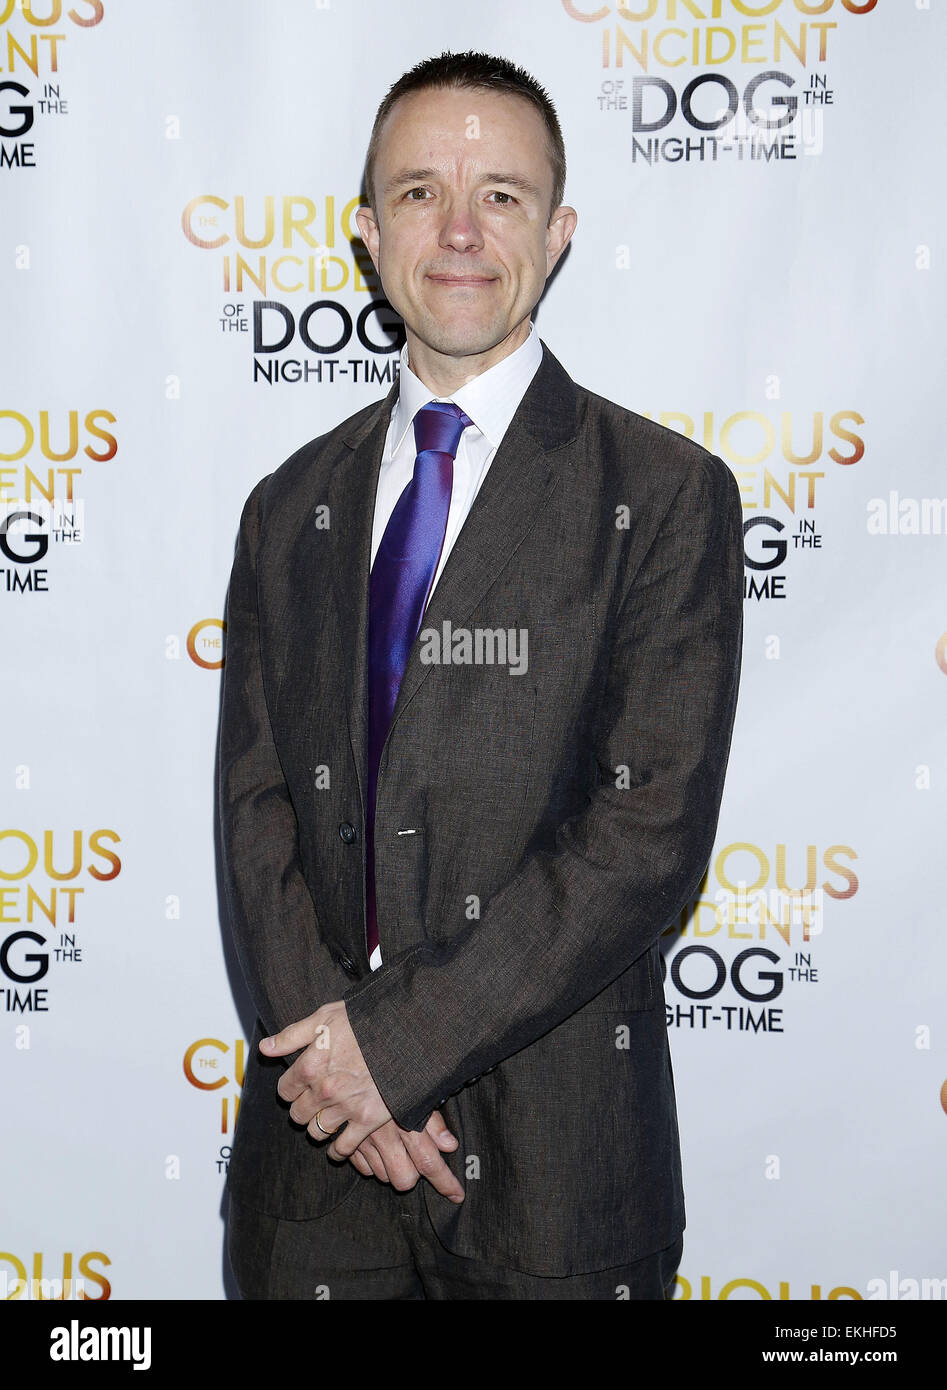 Opening night of The Curious Incident of the Dog in the Night-Time at the Barrymore Theatre - Arrivals.  Featuring: Adrian Sutton Where: New York, New York, United States When: 05 Oct 2014 Stock Photo